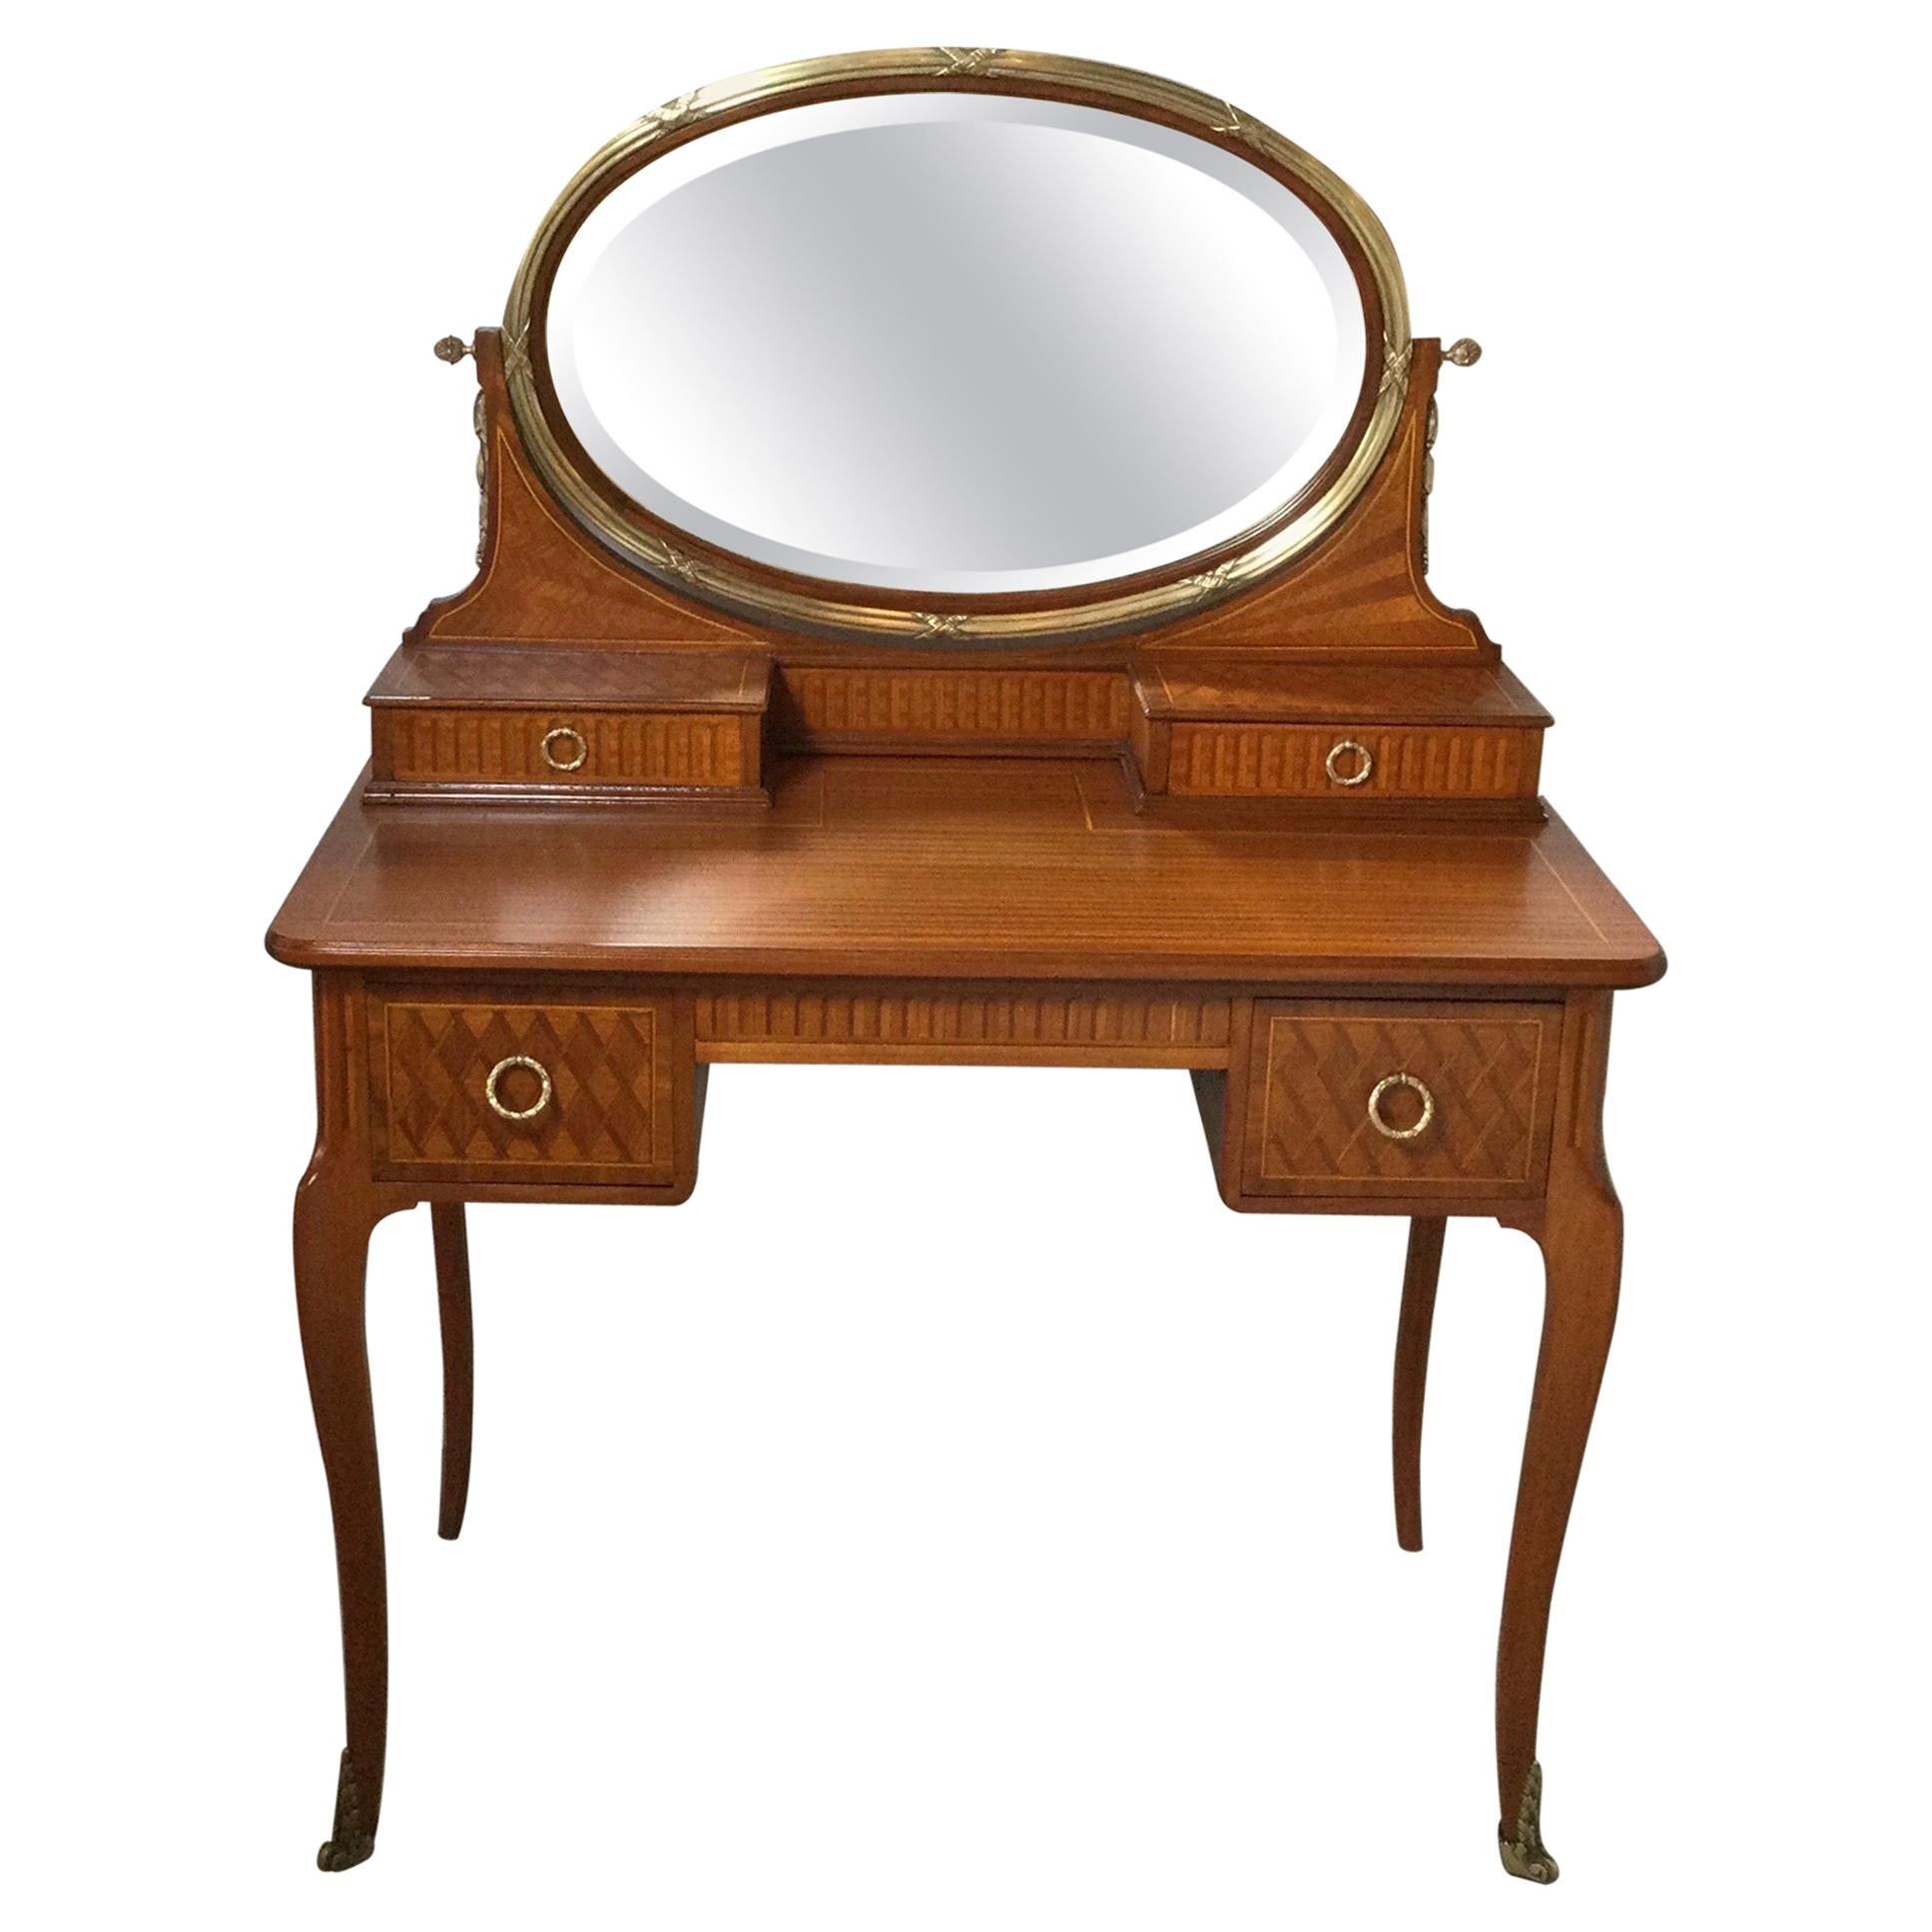 French Inlaid Oval Mirror Vanity with Bronze Mounts